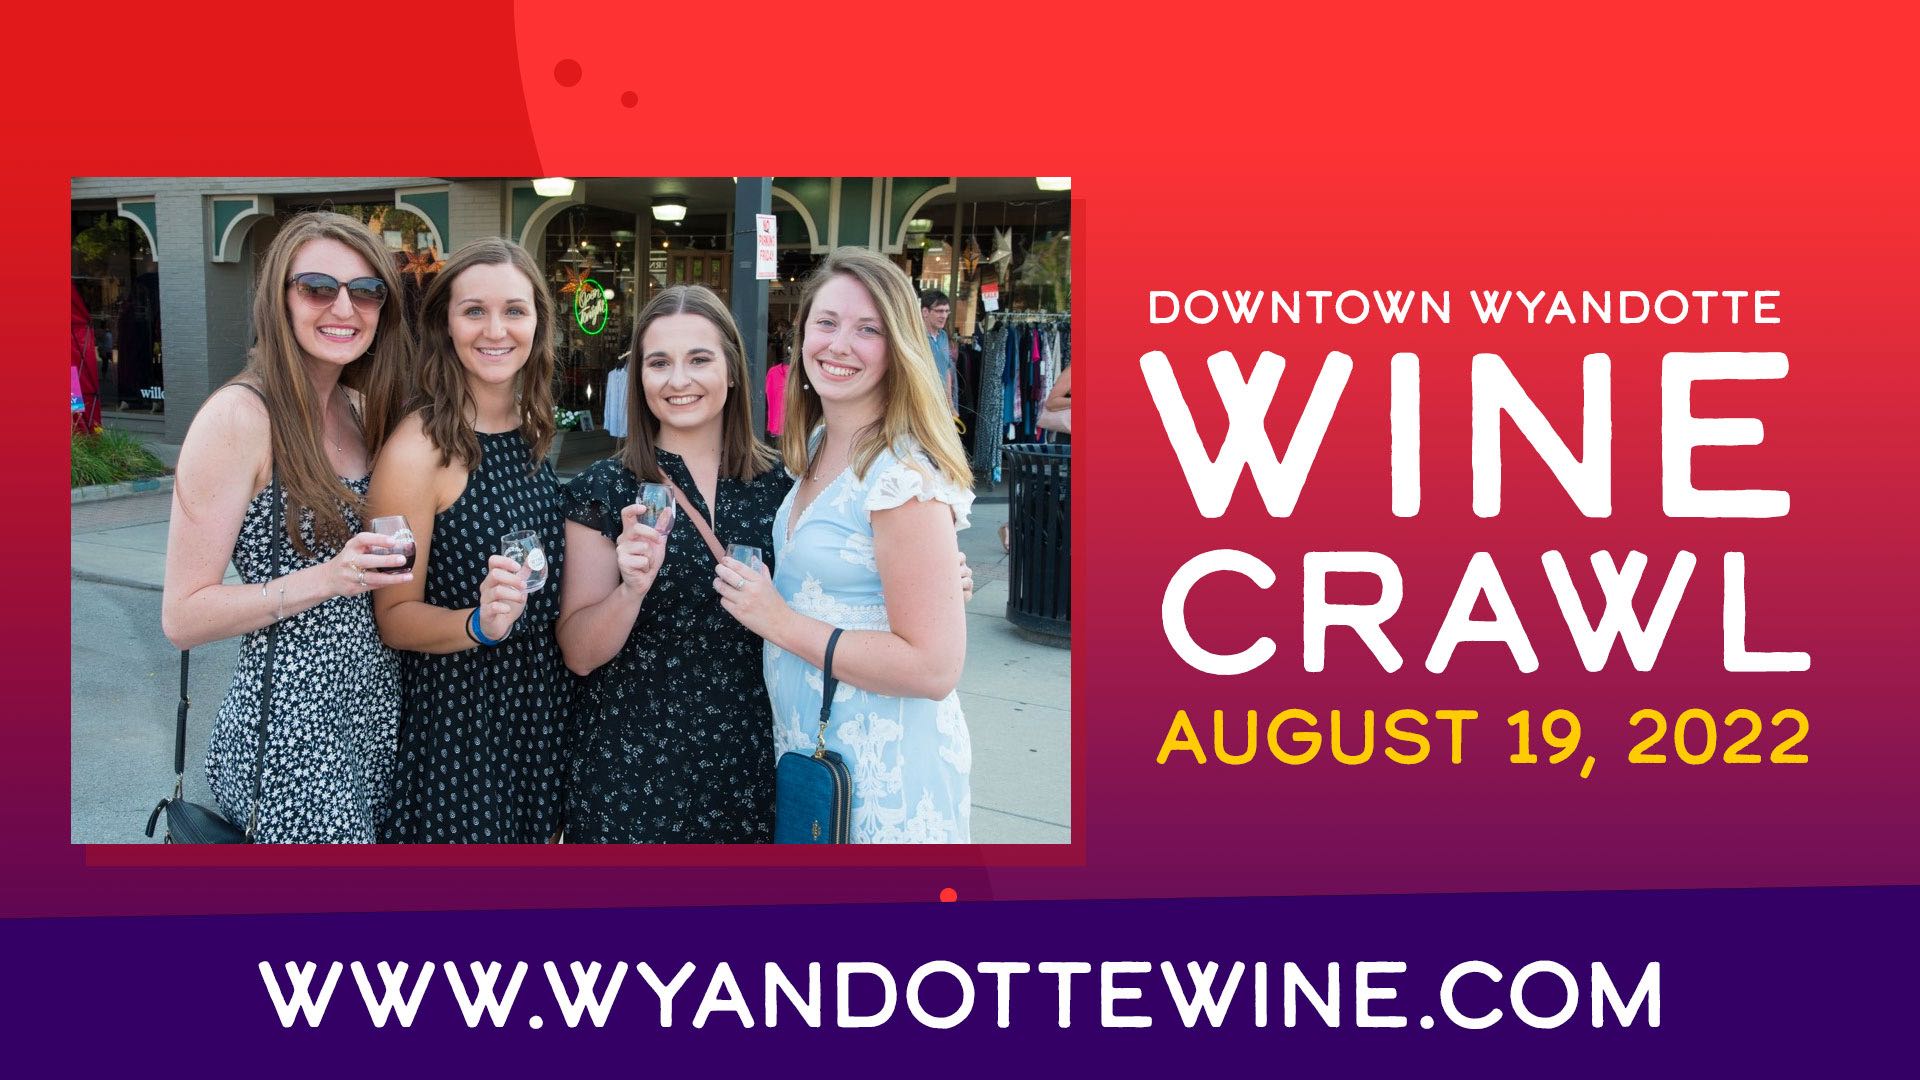 Downtown Wyandotte Wine Crawl; August 19, 2022; www.wyandoteewine.com; featuring image of 4 young ladies posing with wine glasses